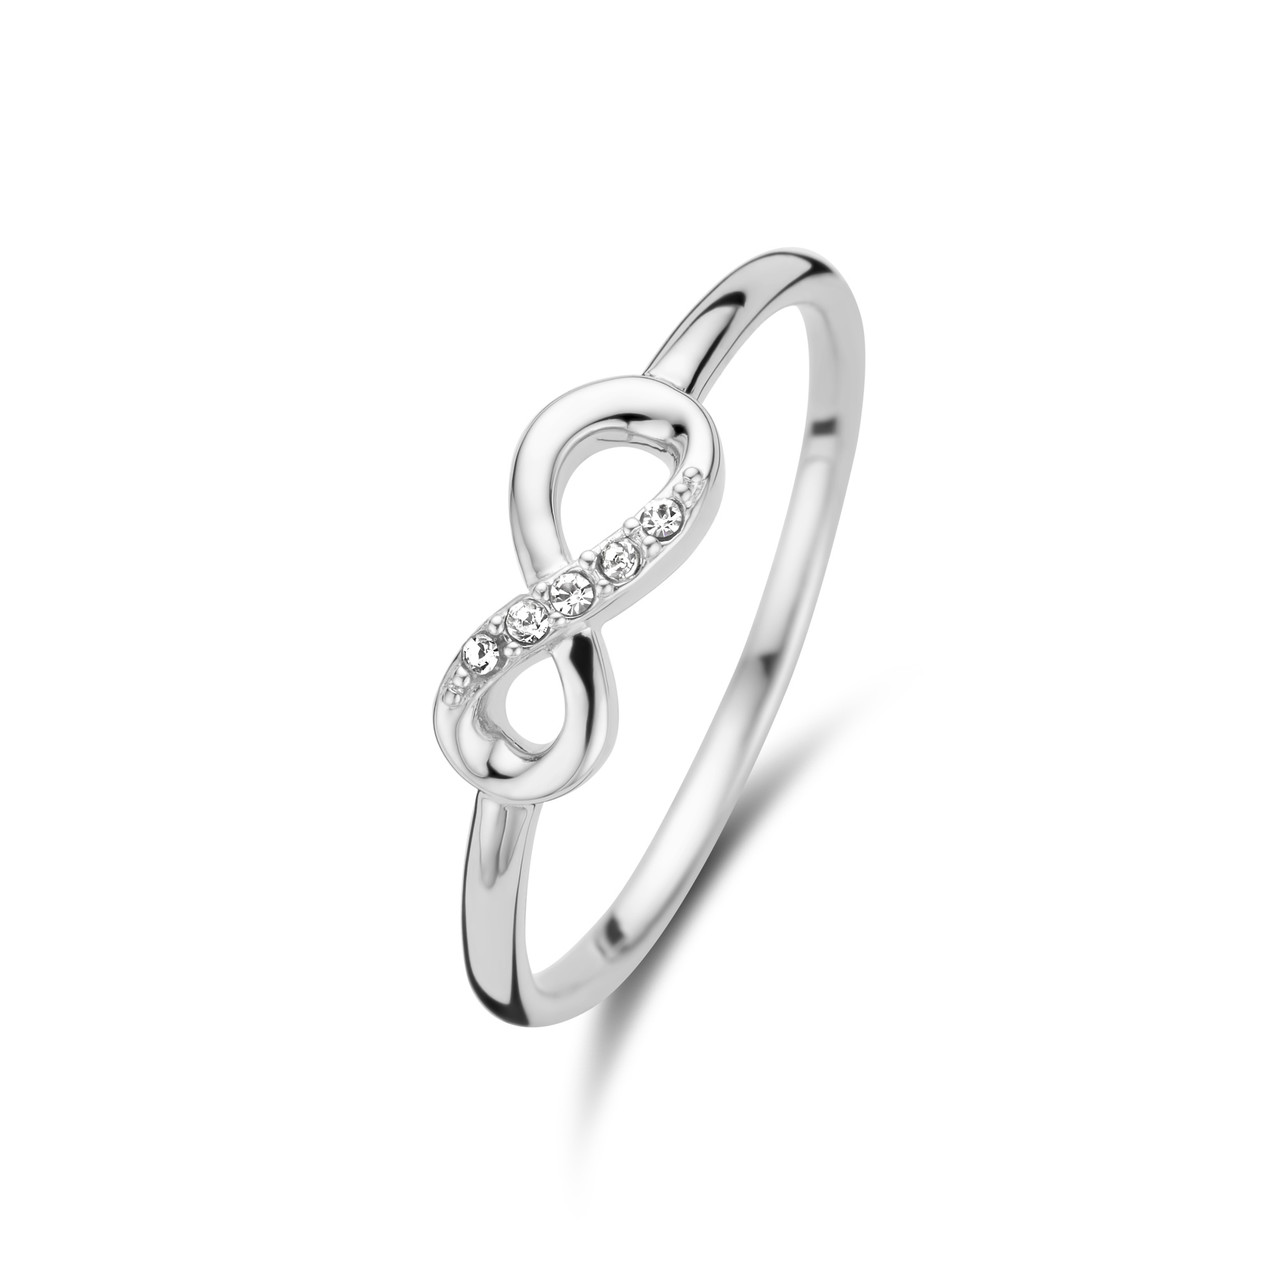 Short Lead Time For Fire Opal Ring - Aimée 925 sterling silver ring with infinity sign – XH&SILVER